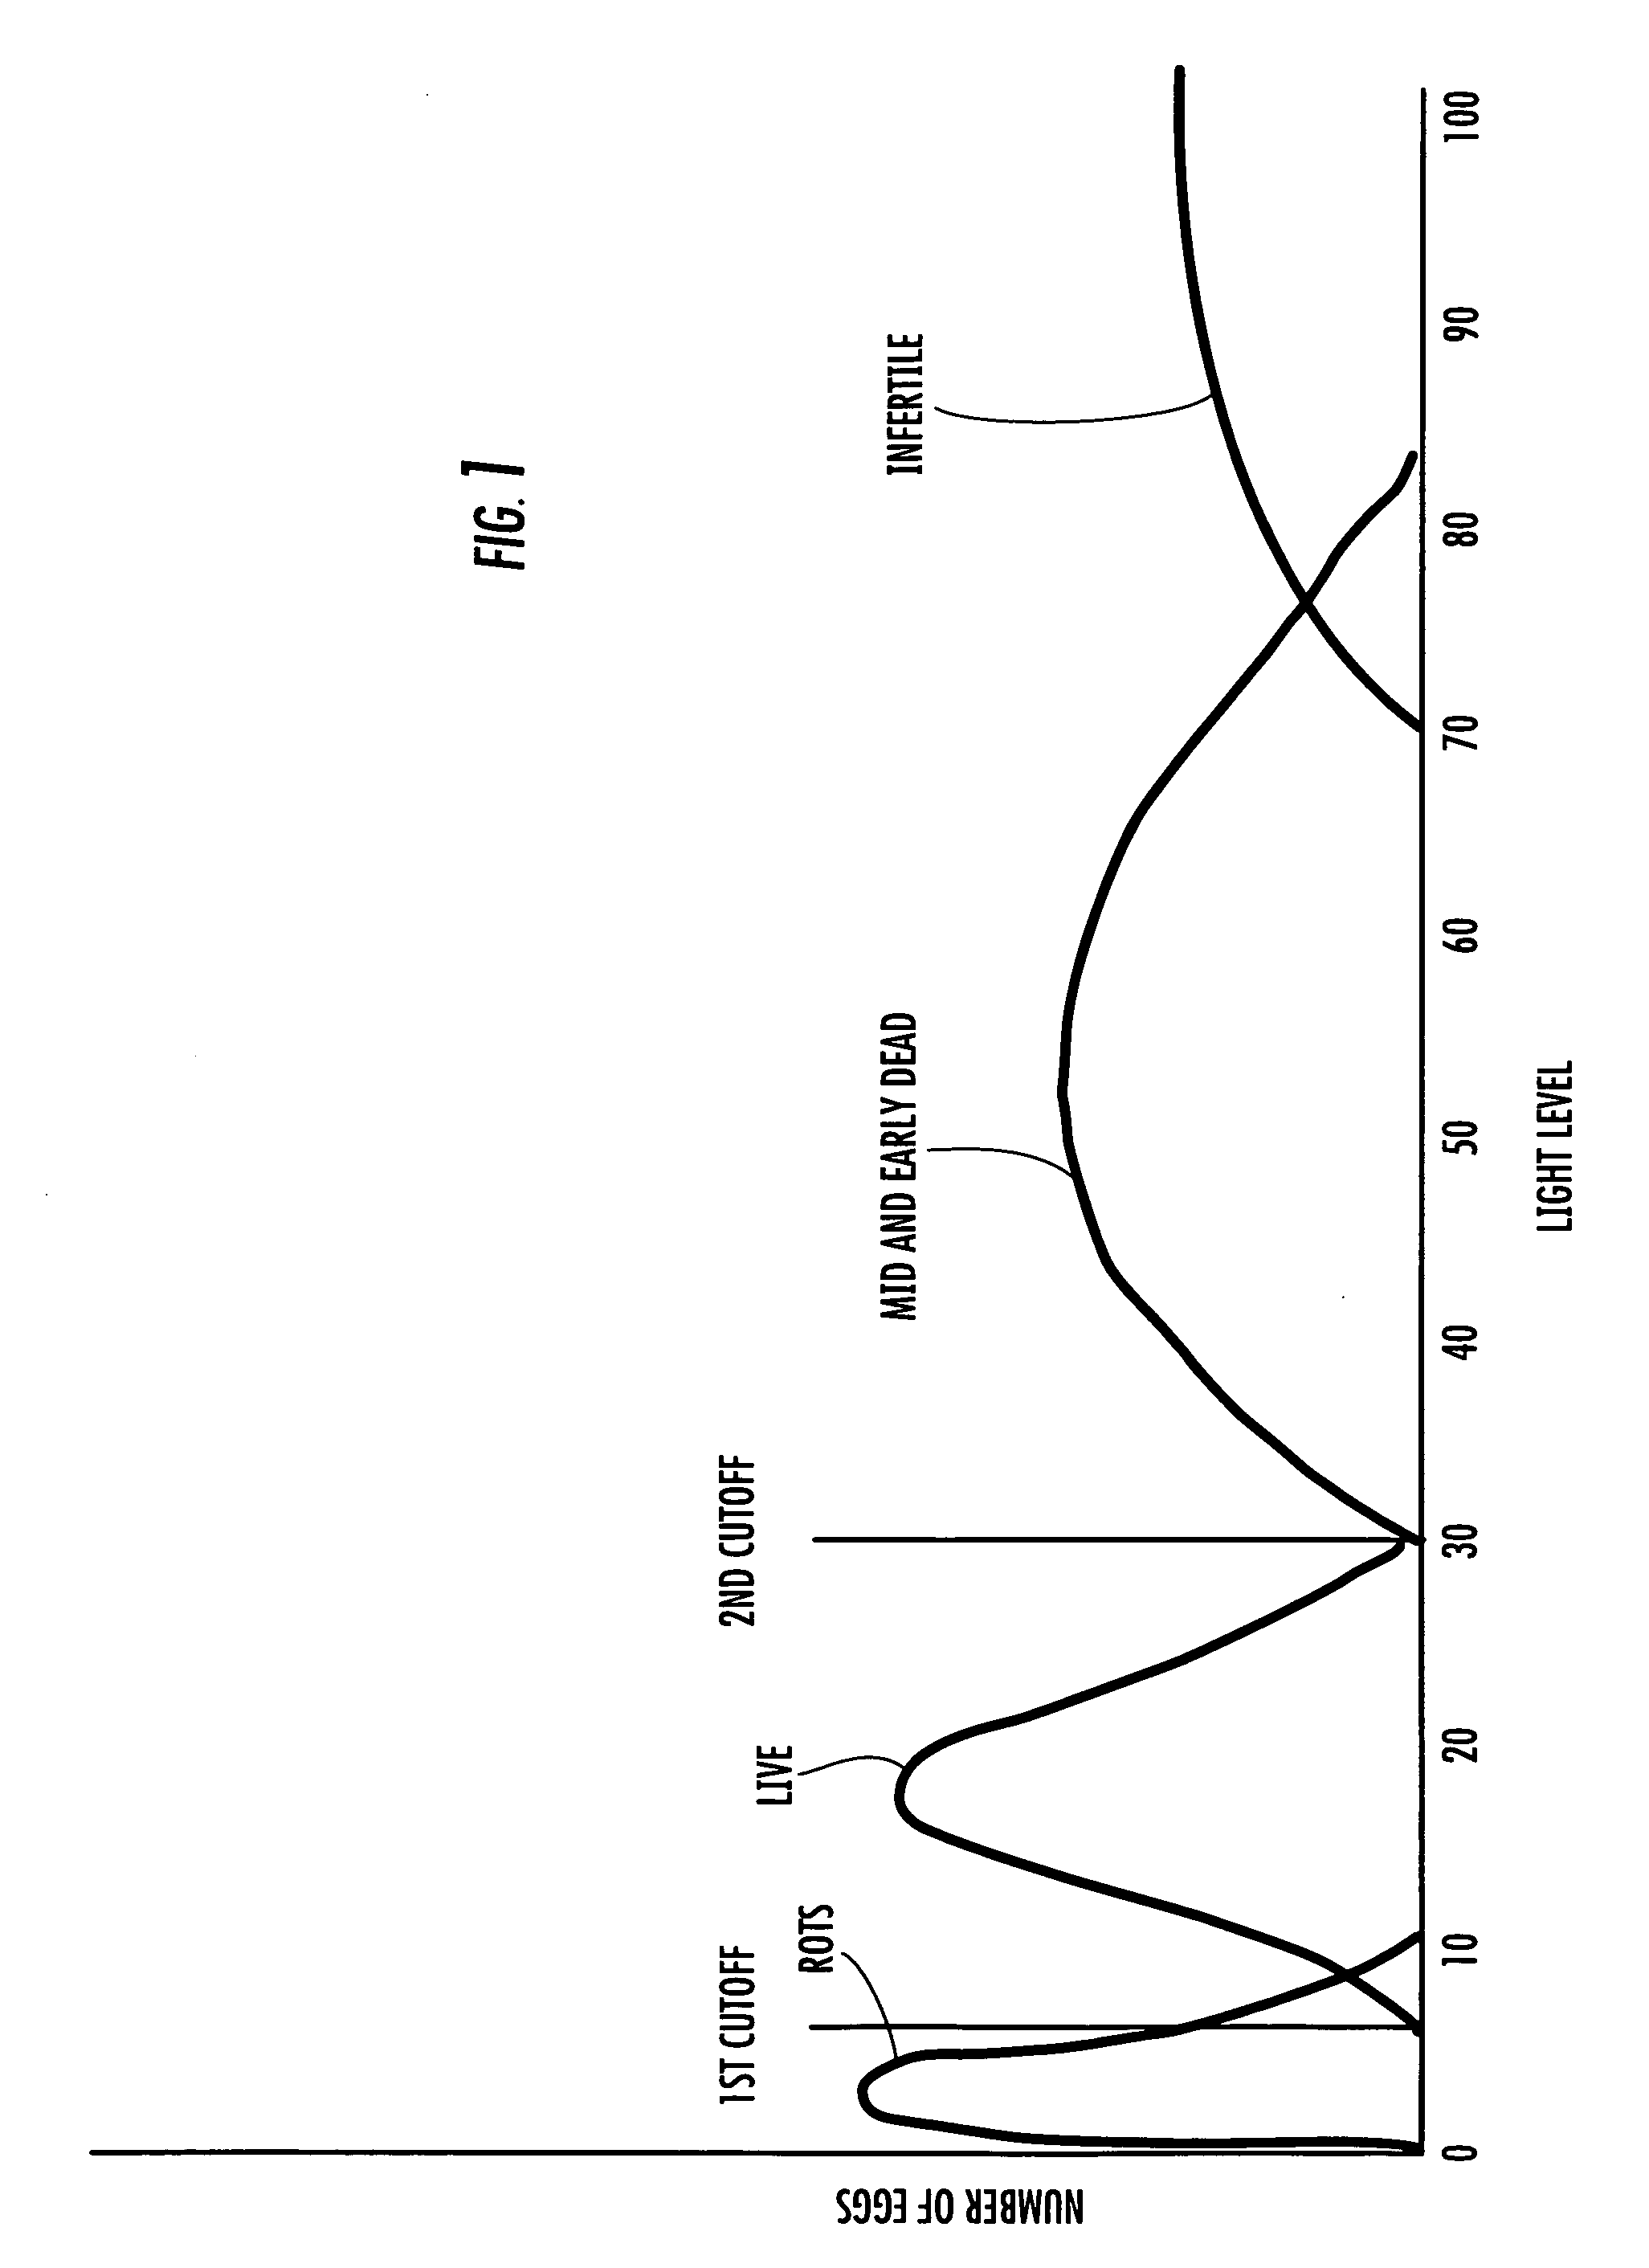 Methods and apparatus for identifying live eggs